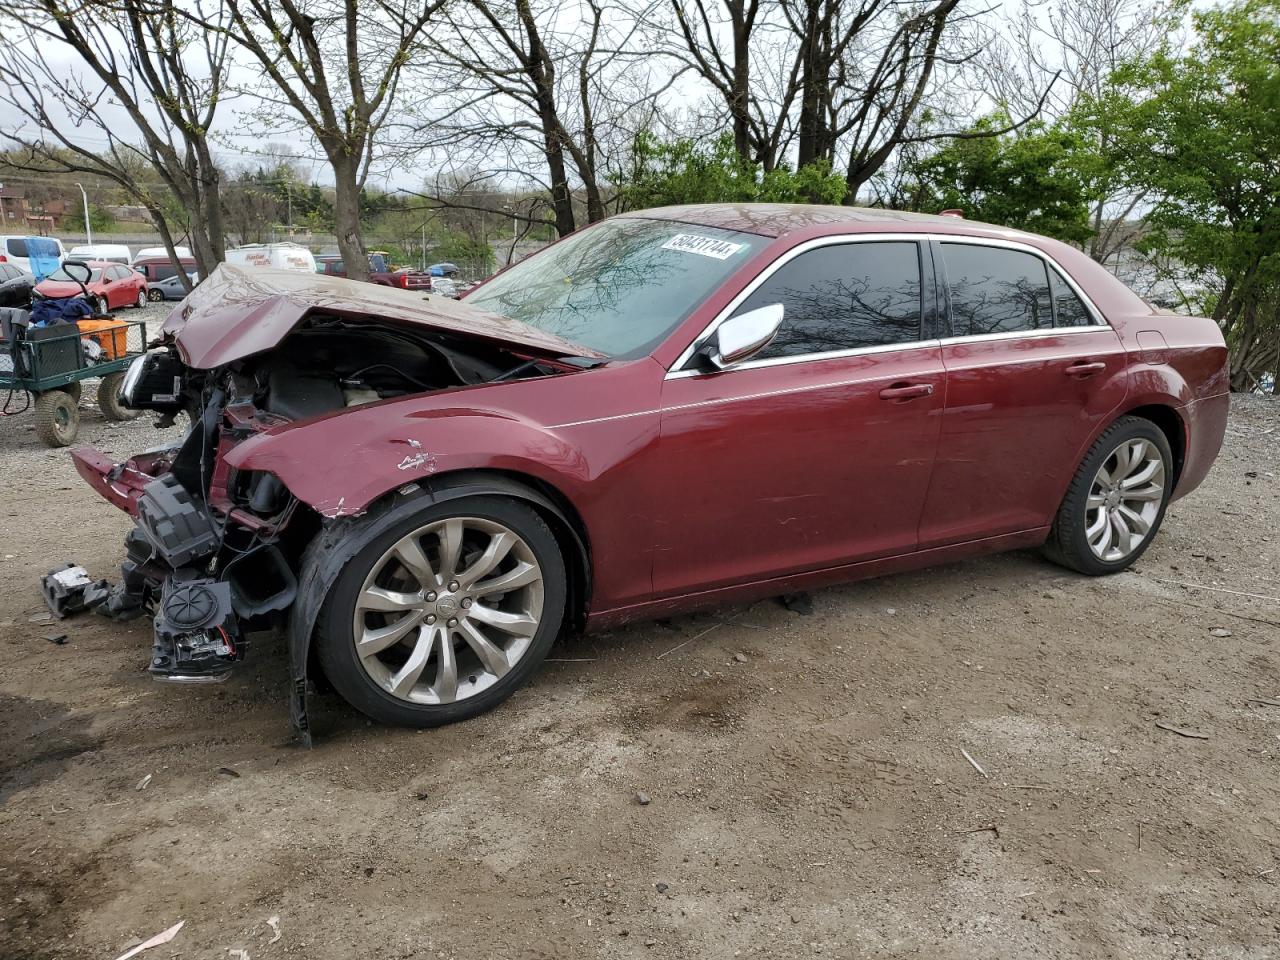 vin: 2C3CCAAG1KH601880 2C3CCAAG1KH601880 2019 chrysler 300 3600 for Sale in 21225, Md - Baltimore East, Baltimore, Maryland, USA